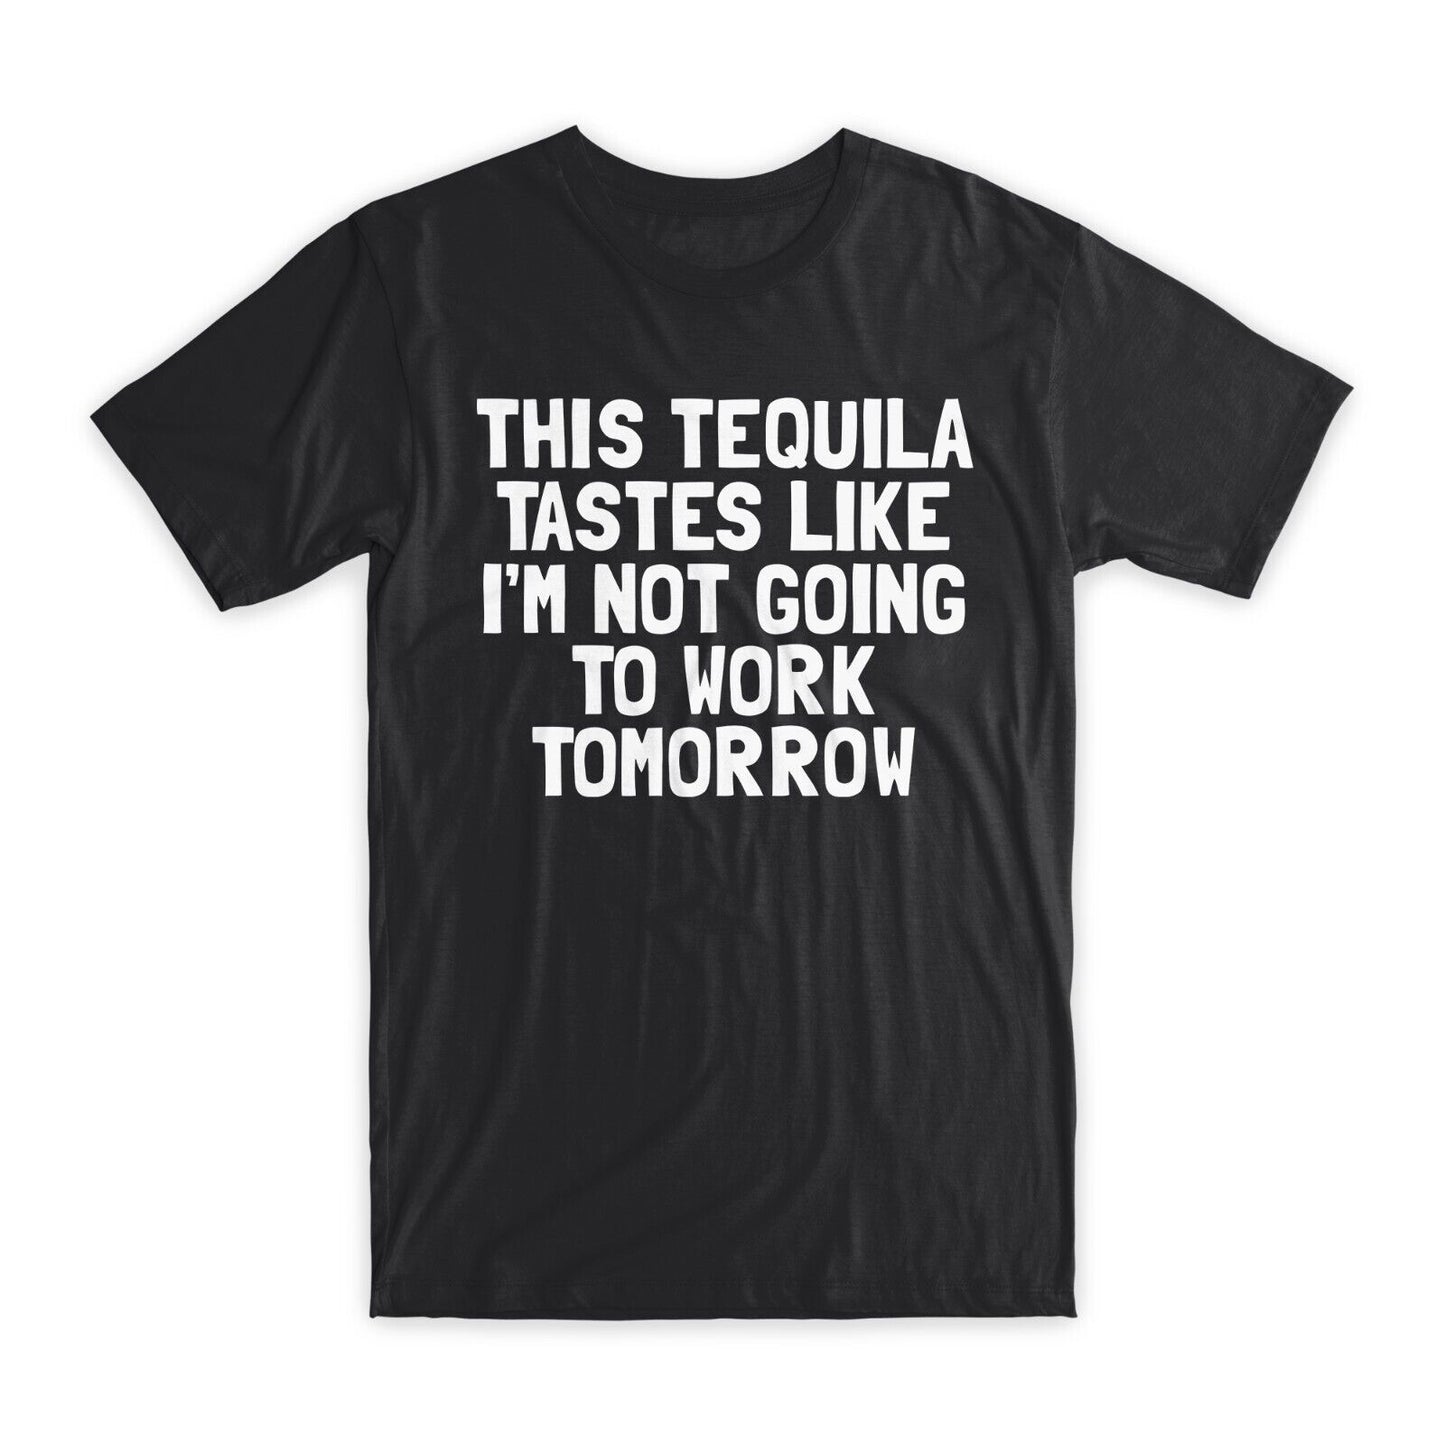 This Tequila Tastes Like T-Shirt Premium Soft Cotton Funny Tees Novelty Gift NEW